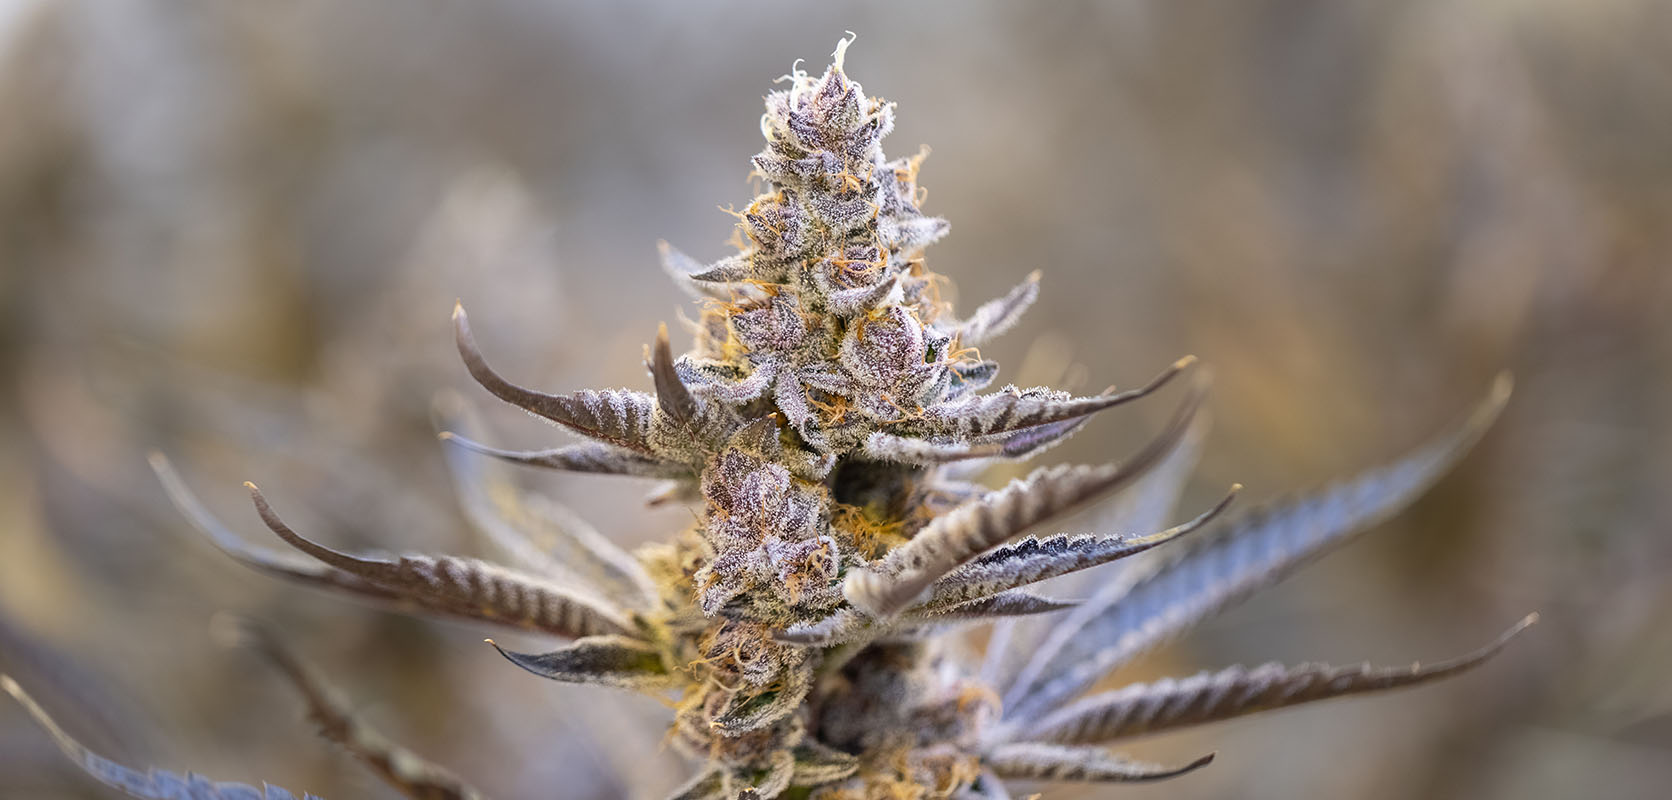 Close up of MAC 10 strain cannabis plant. Buy MAC 10 weed online in Canada at Low Price Bud weed dispensary and mail order marijuana weed store.